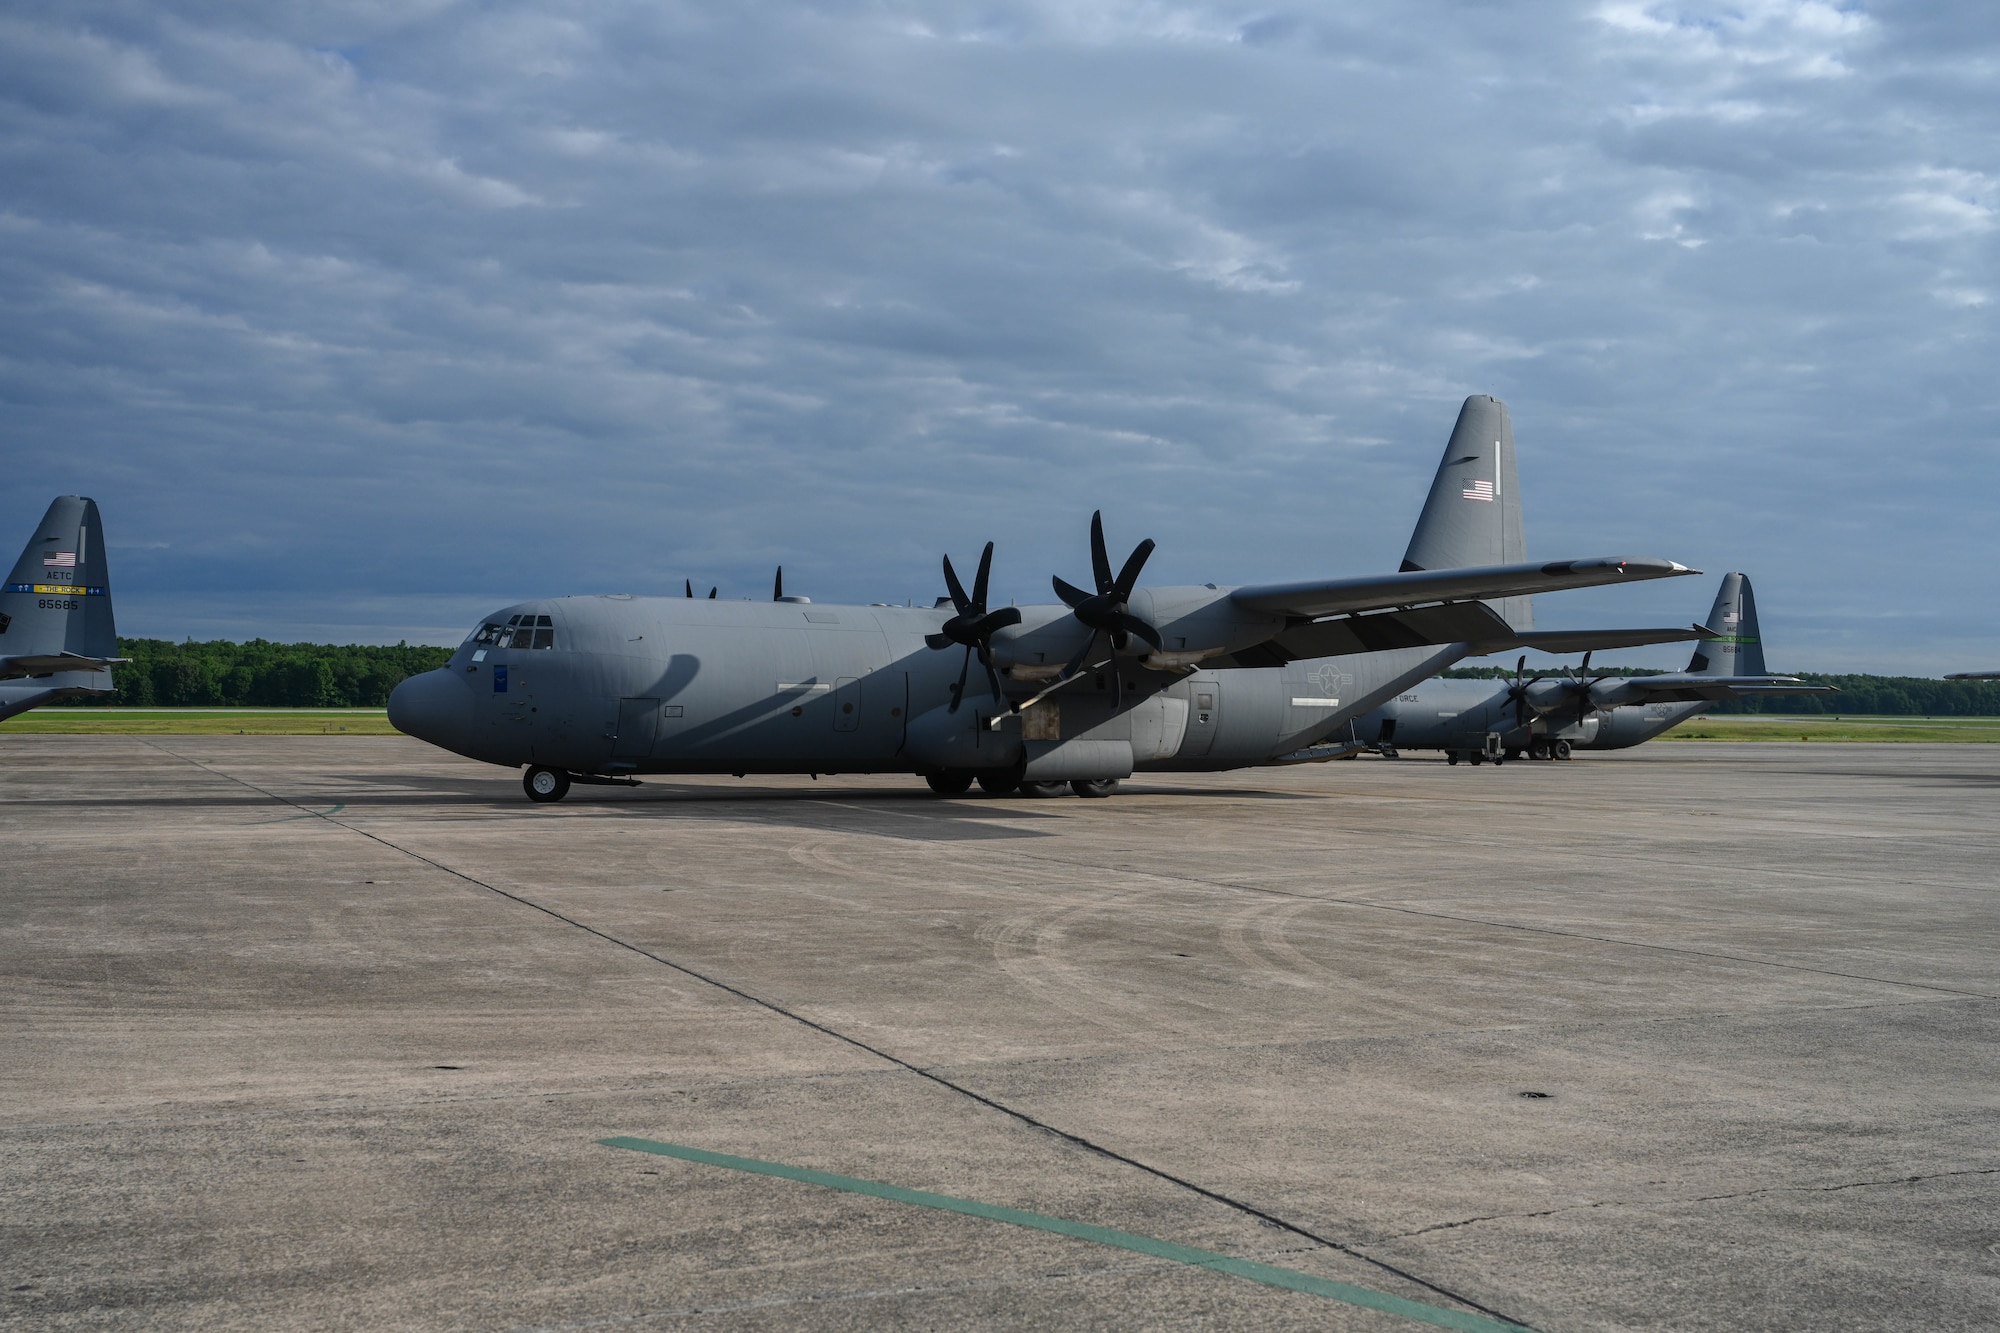 Airmen and aircraft from the 19th Airlift Wing participate in a rocket launch exercise